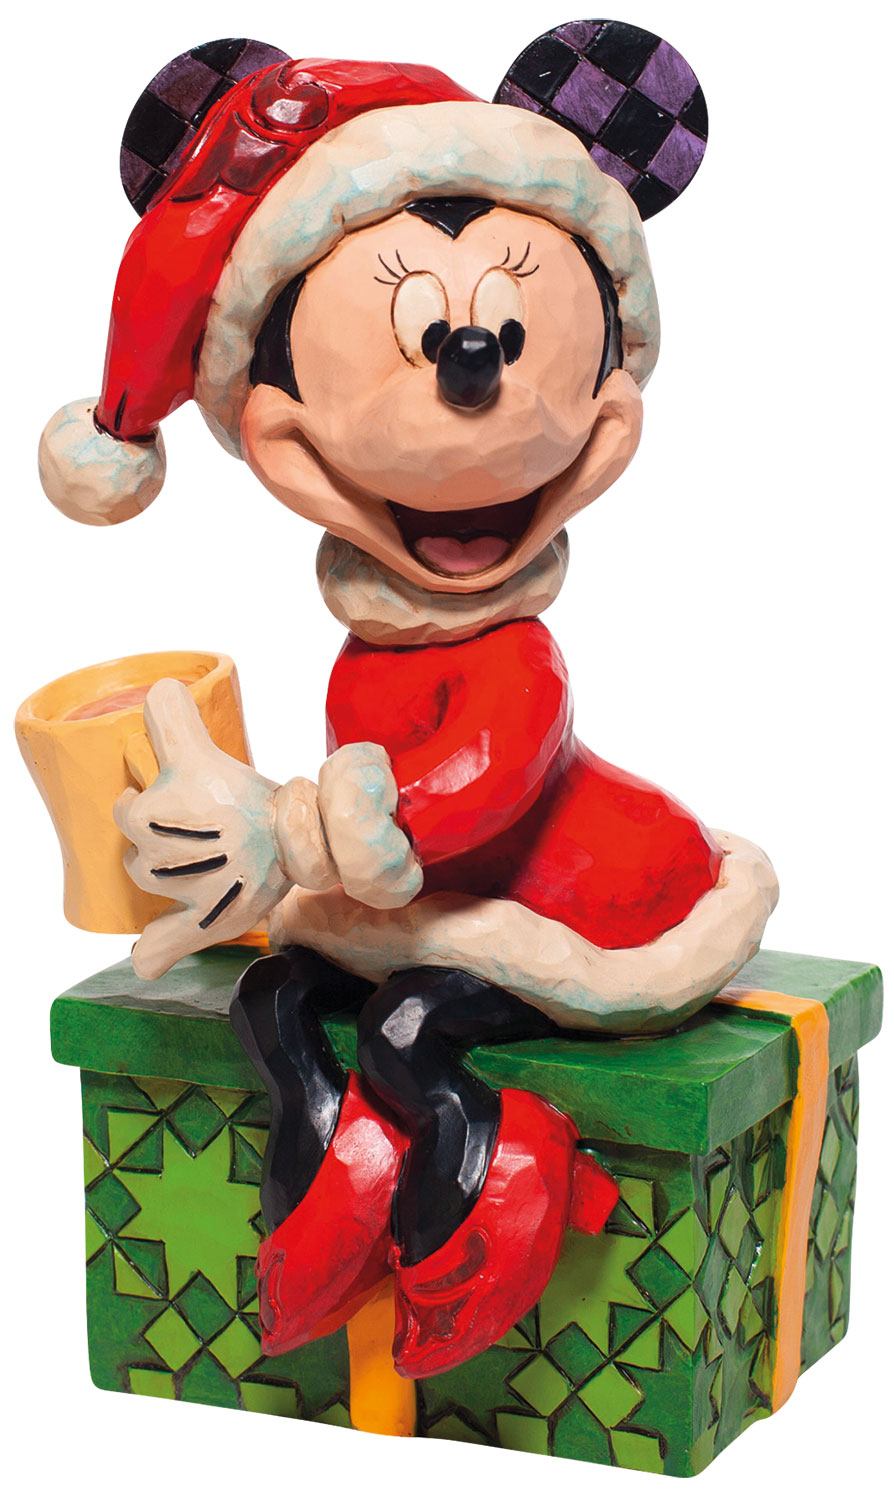 Sculpture "Minnie Mouse with Hot Chocolate", cast by Jim Shore